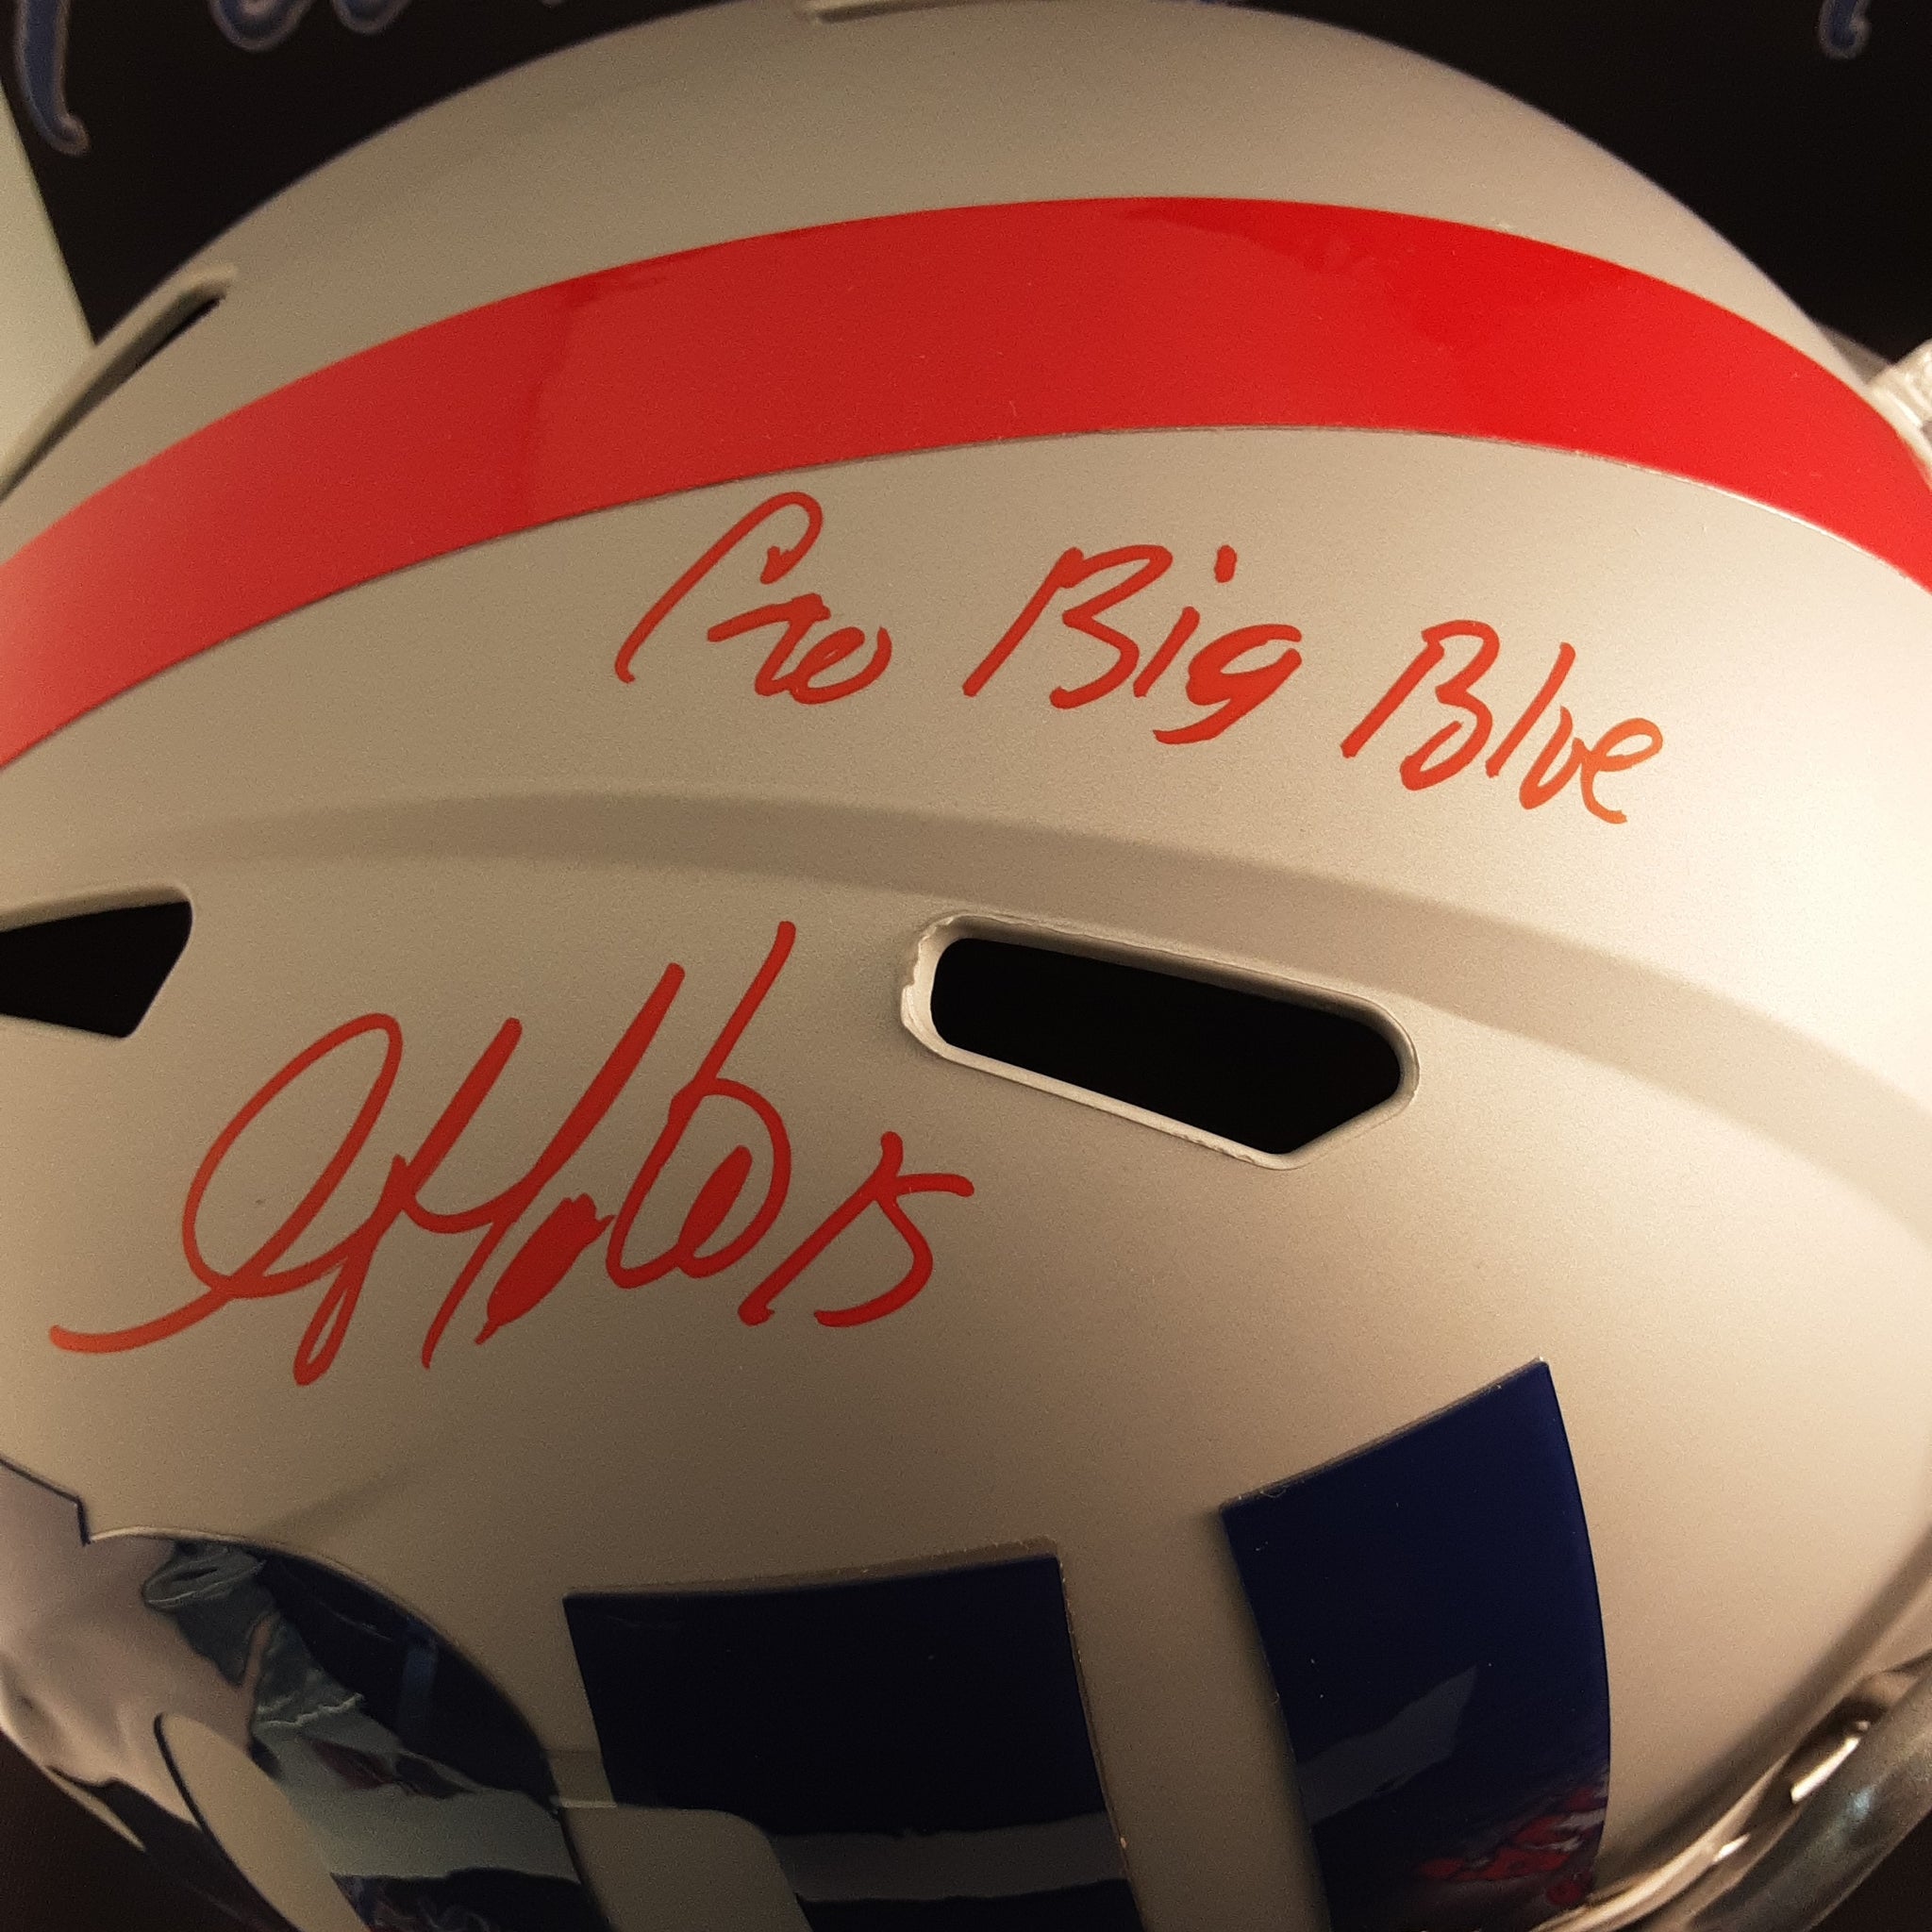 Golden Tate Authentic Signed Autographed Full-size Replica Helmet JSA.